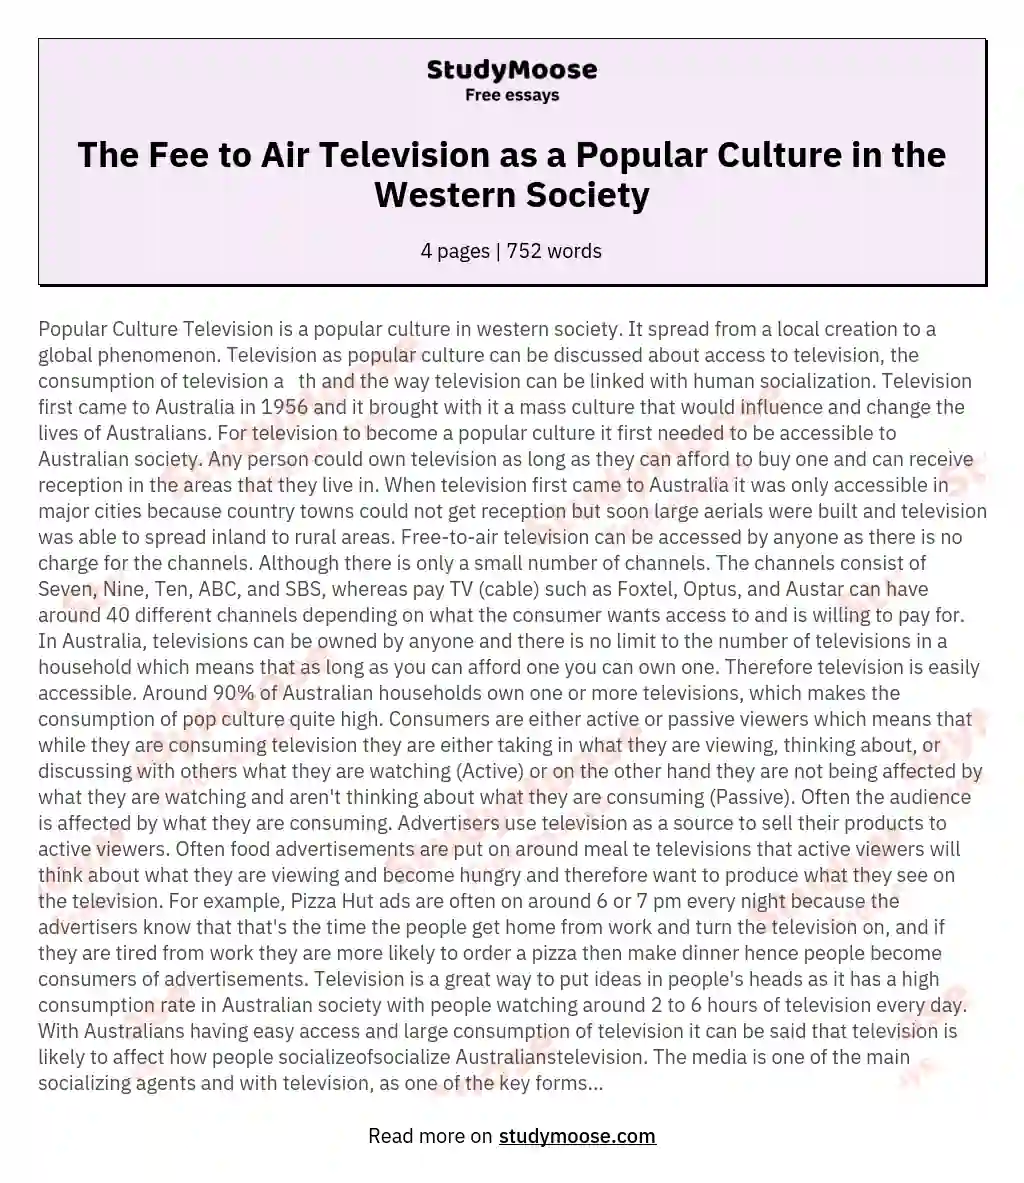 The Fee to Air Television as a Popular Culture in the Western Society essay